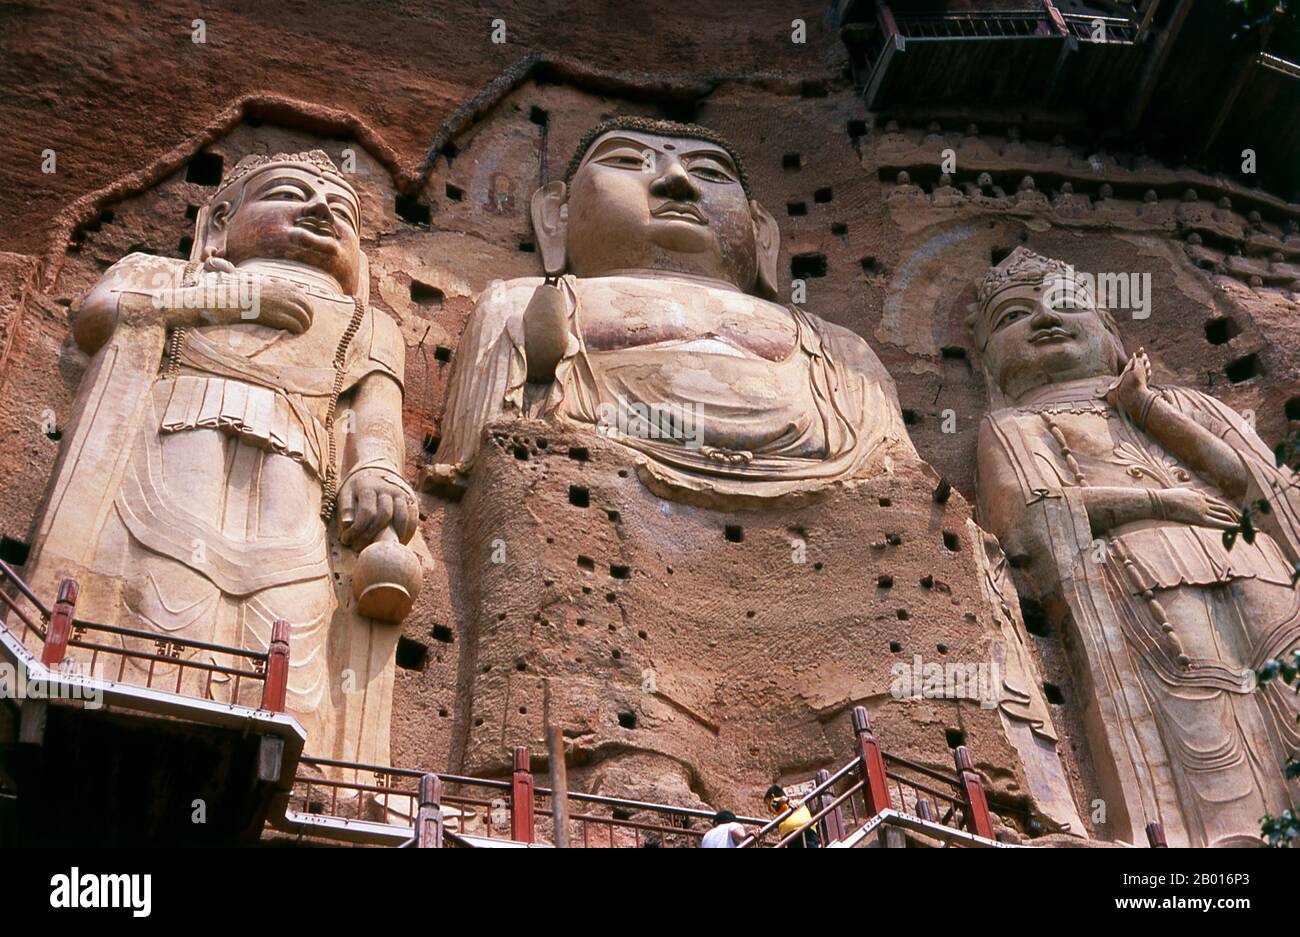 China: Buddhas first carved during the Sui Dynasty (581 - 618 CE), Maiji Shan Grottoes, Tianshui, Gansu Province.  Maijishan Shiku (Maiji Shan Grottoes) are one of China’s four most important Buddhist temple groups (the others being Datong, Luoyang, and the Mogao Caves at Dunhuang).  Starting from the Northern Wei (386-535) and Northern Zhou (557-81) Dynasties, Buddhists cut caves into the sides of a red outcrop rising from the surrounding foliage-covered hills. Figures of the Buddha, of bodhisattvas and disciples were carved in harder rock brought from elsewhere, and installed in the caves. Stock Photo